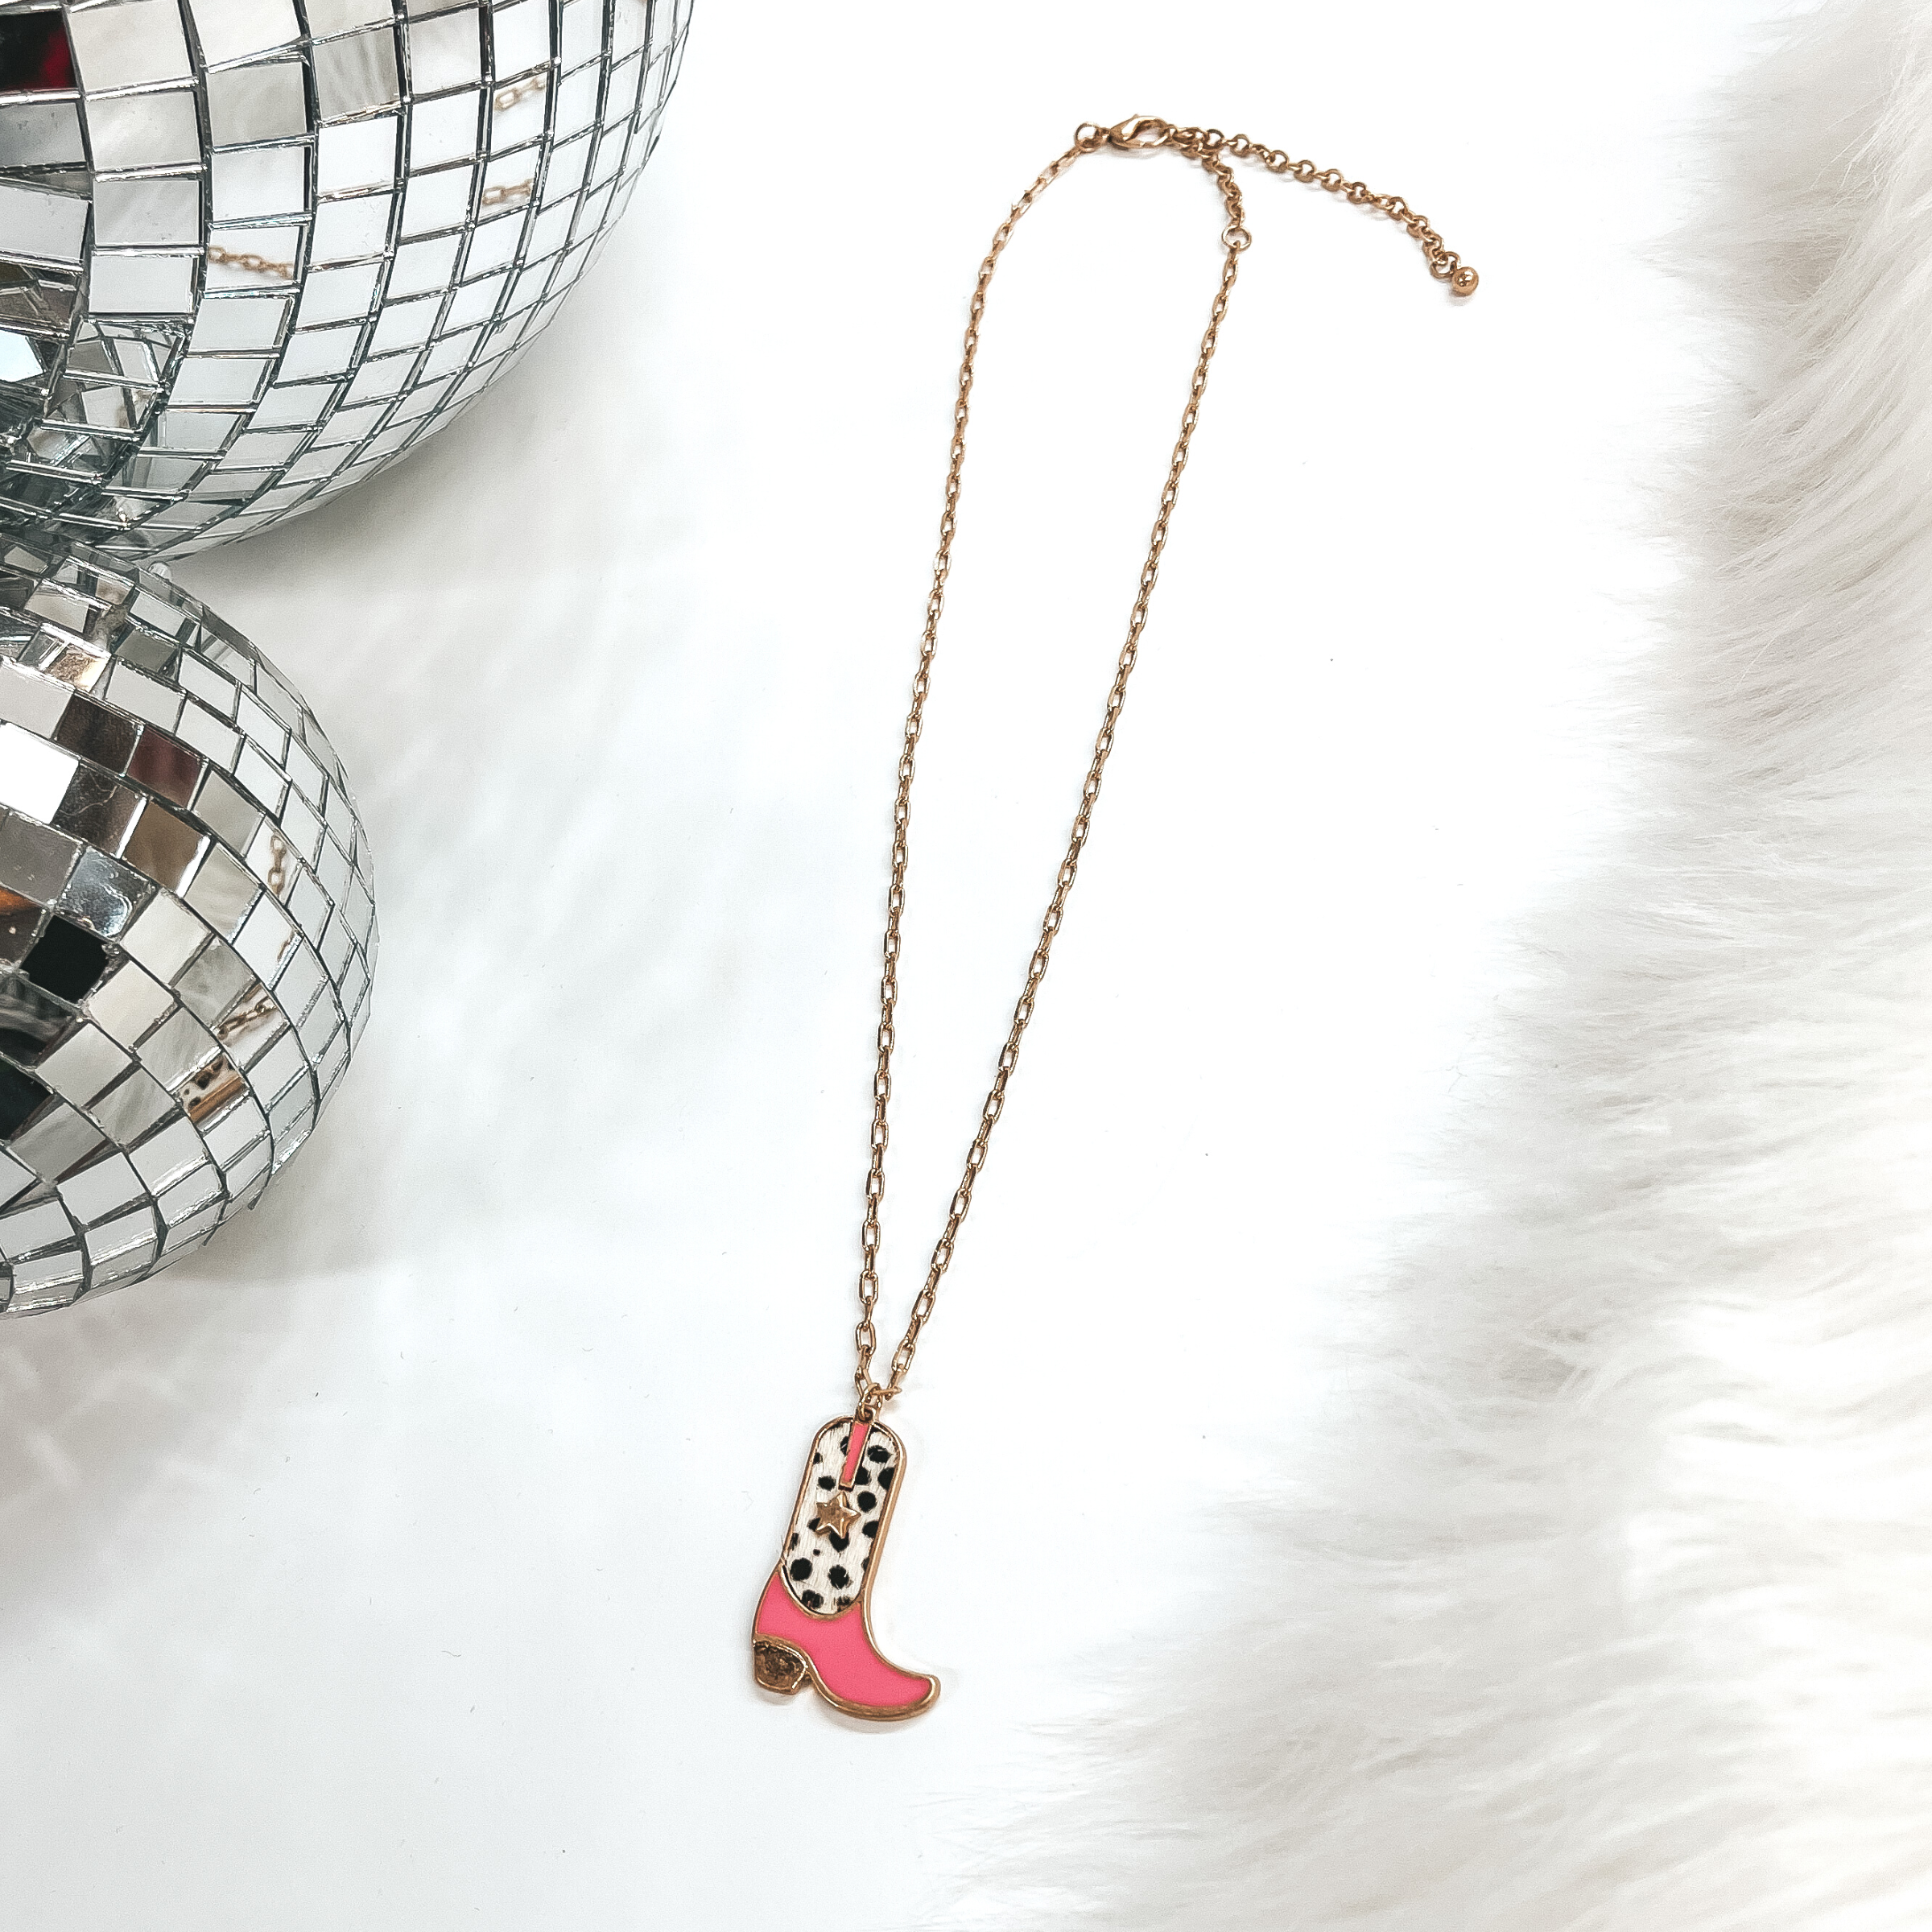 This is a gold chain necklace with a boot pendant  in a gold setting. The boot pendant is pink and  has a dotted print with a gold star. This necklace  is taken on laying on a white background with a  white fur carpet in the side and two disco ball as  decor.